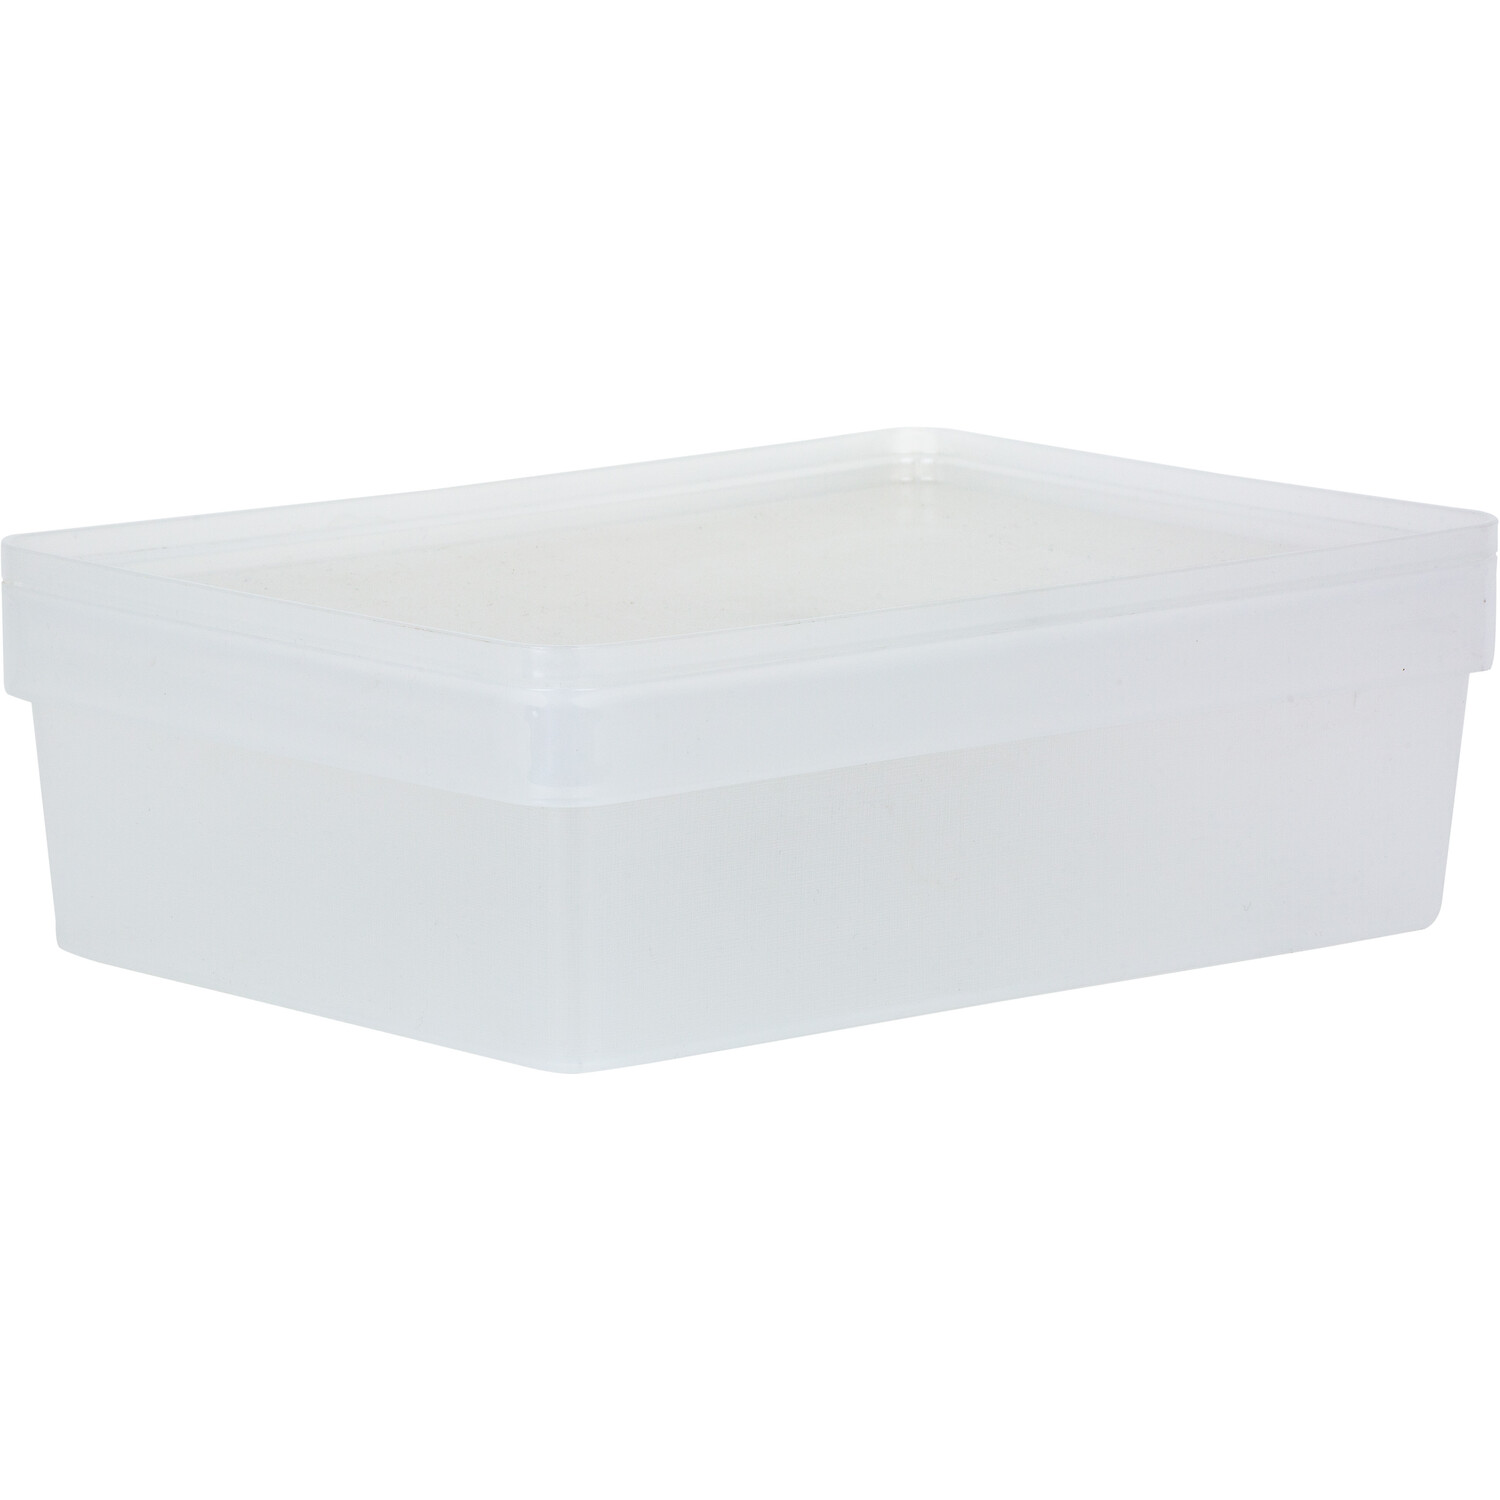 Studio Box and Lid  - Clear / 11cm Image 3